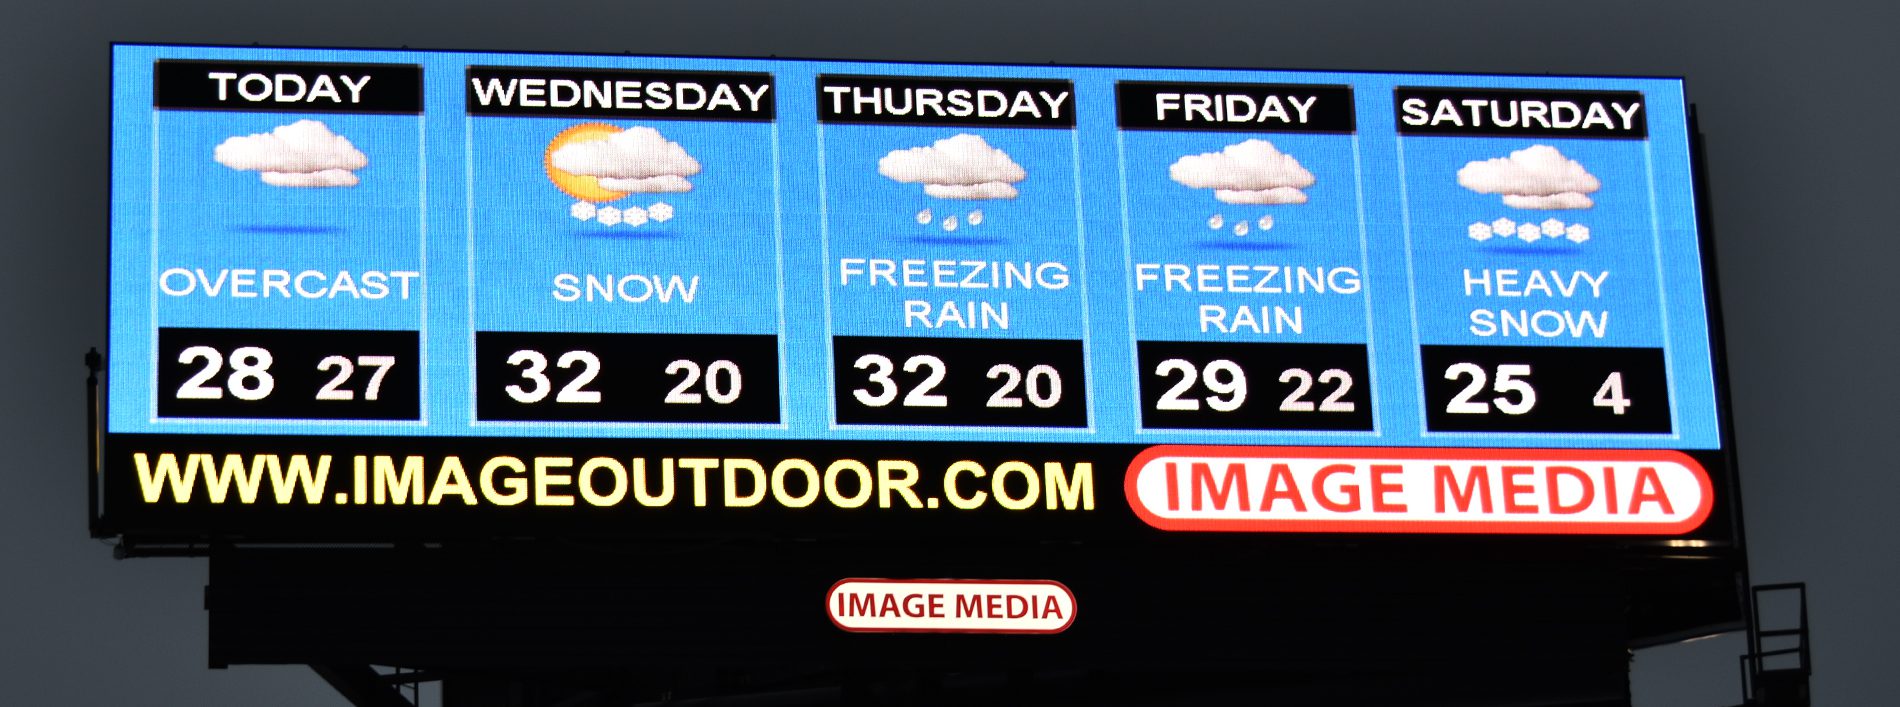 IMAGE MEDIA DIGITAL Avail WEATHER 5 Day